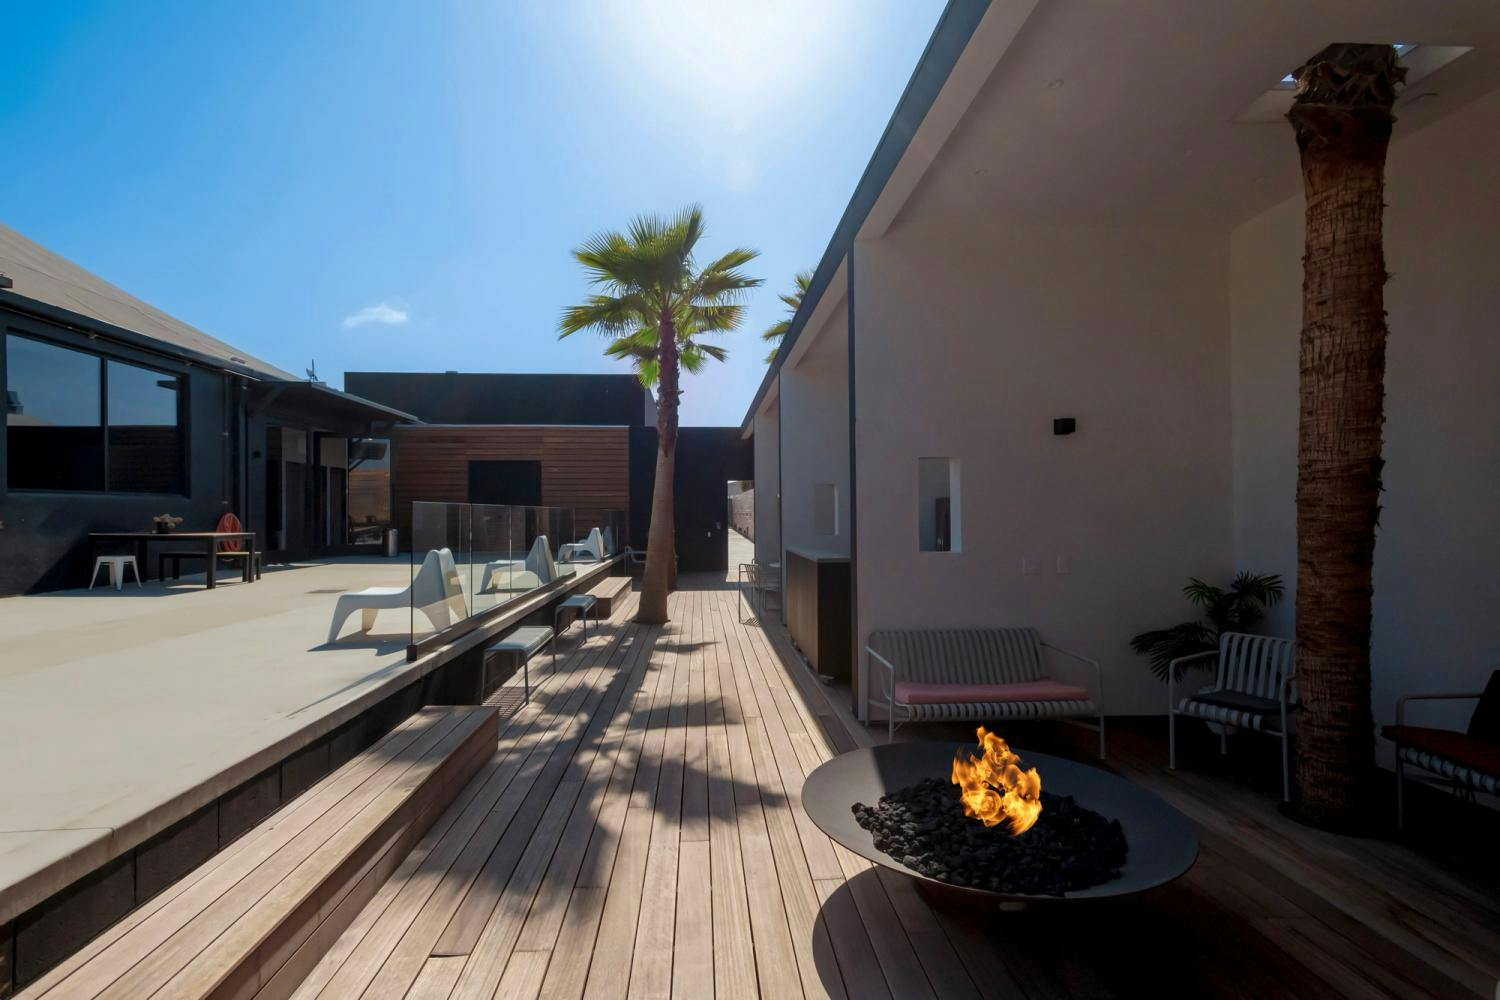 An elegant outdoor space featuring a fire pit, comfortable seating, and wooden decking, under a bright blue sky.